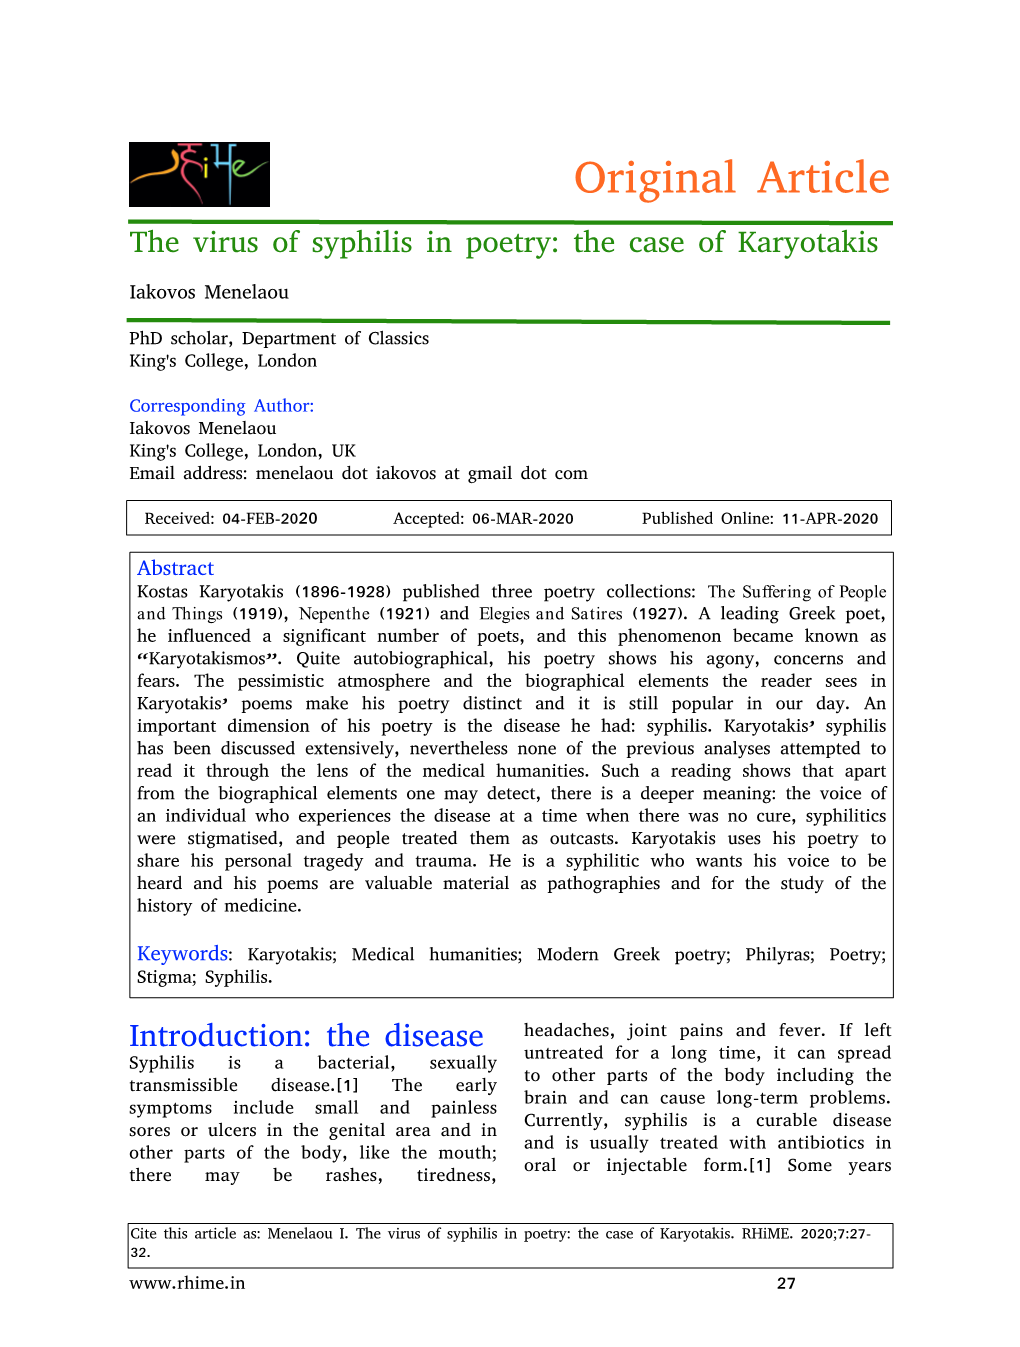 Original Article the Virus of Syphilis in Poetry: the Case of Karyotakis